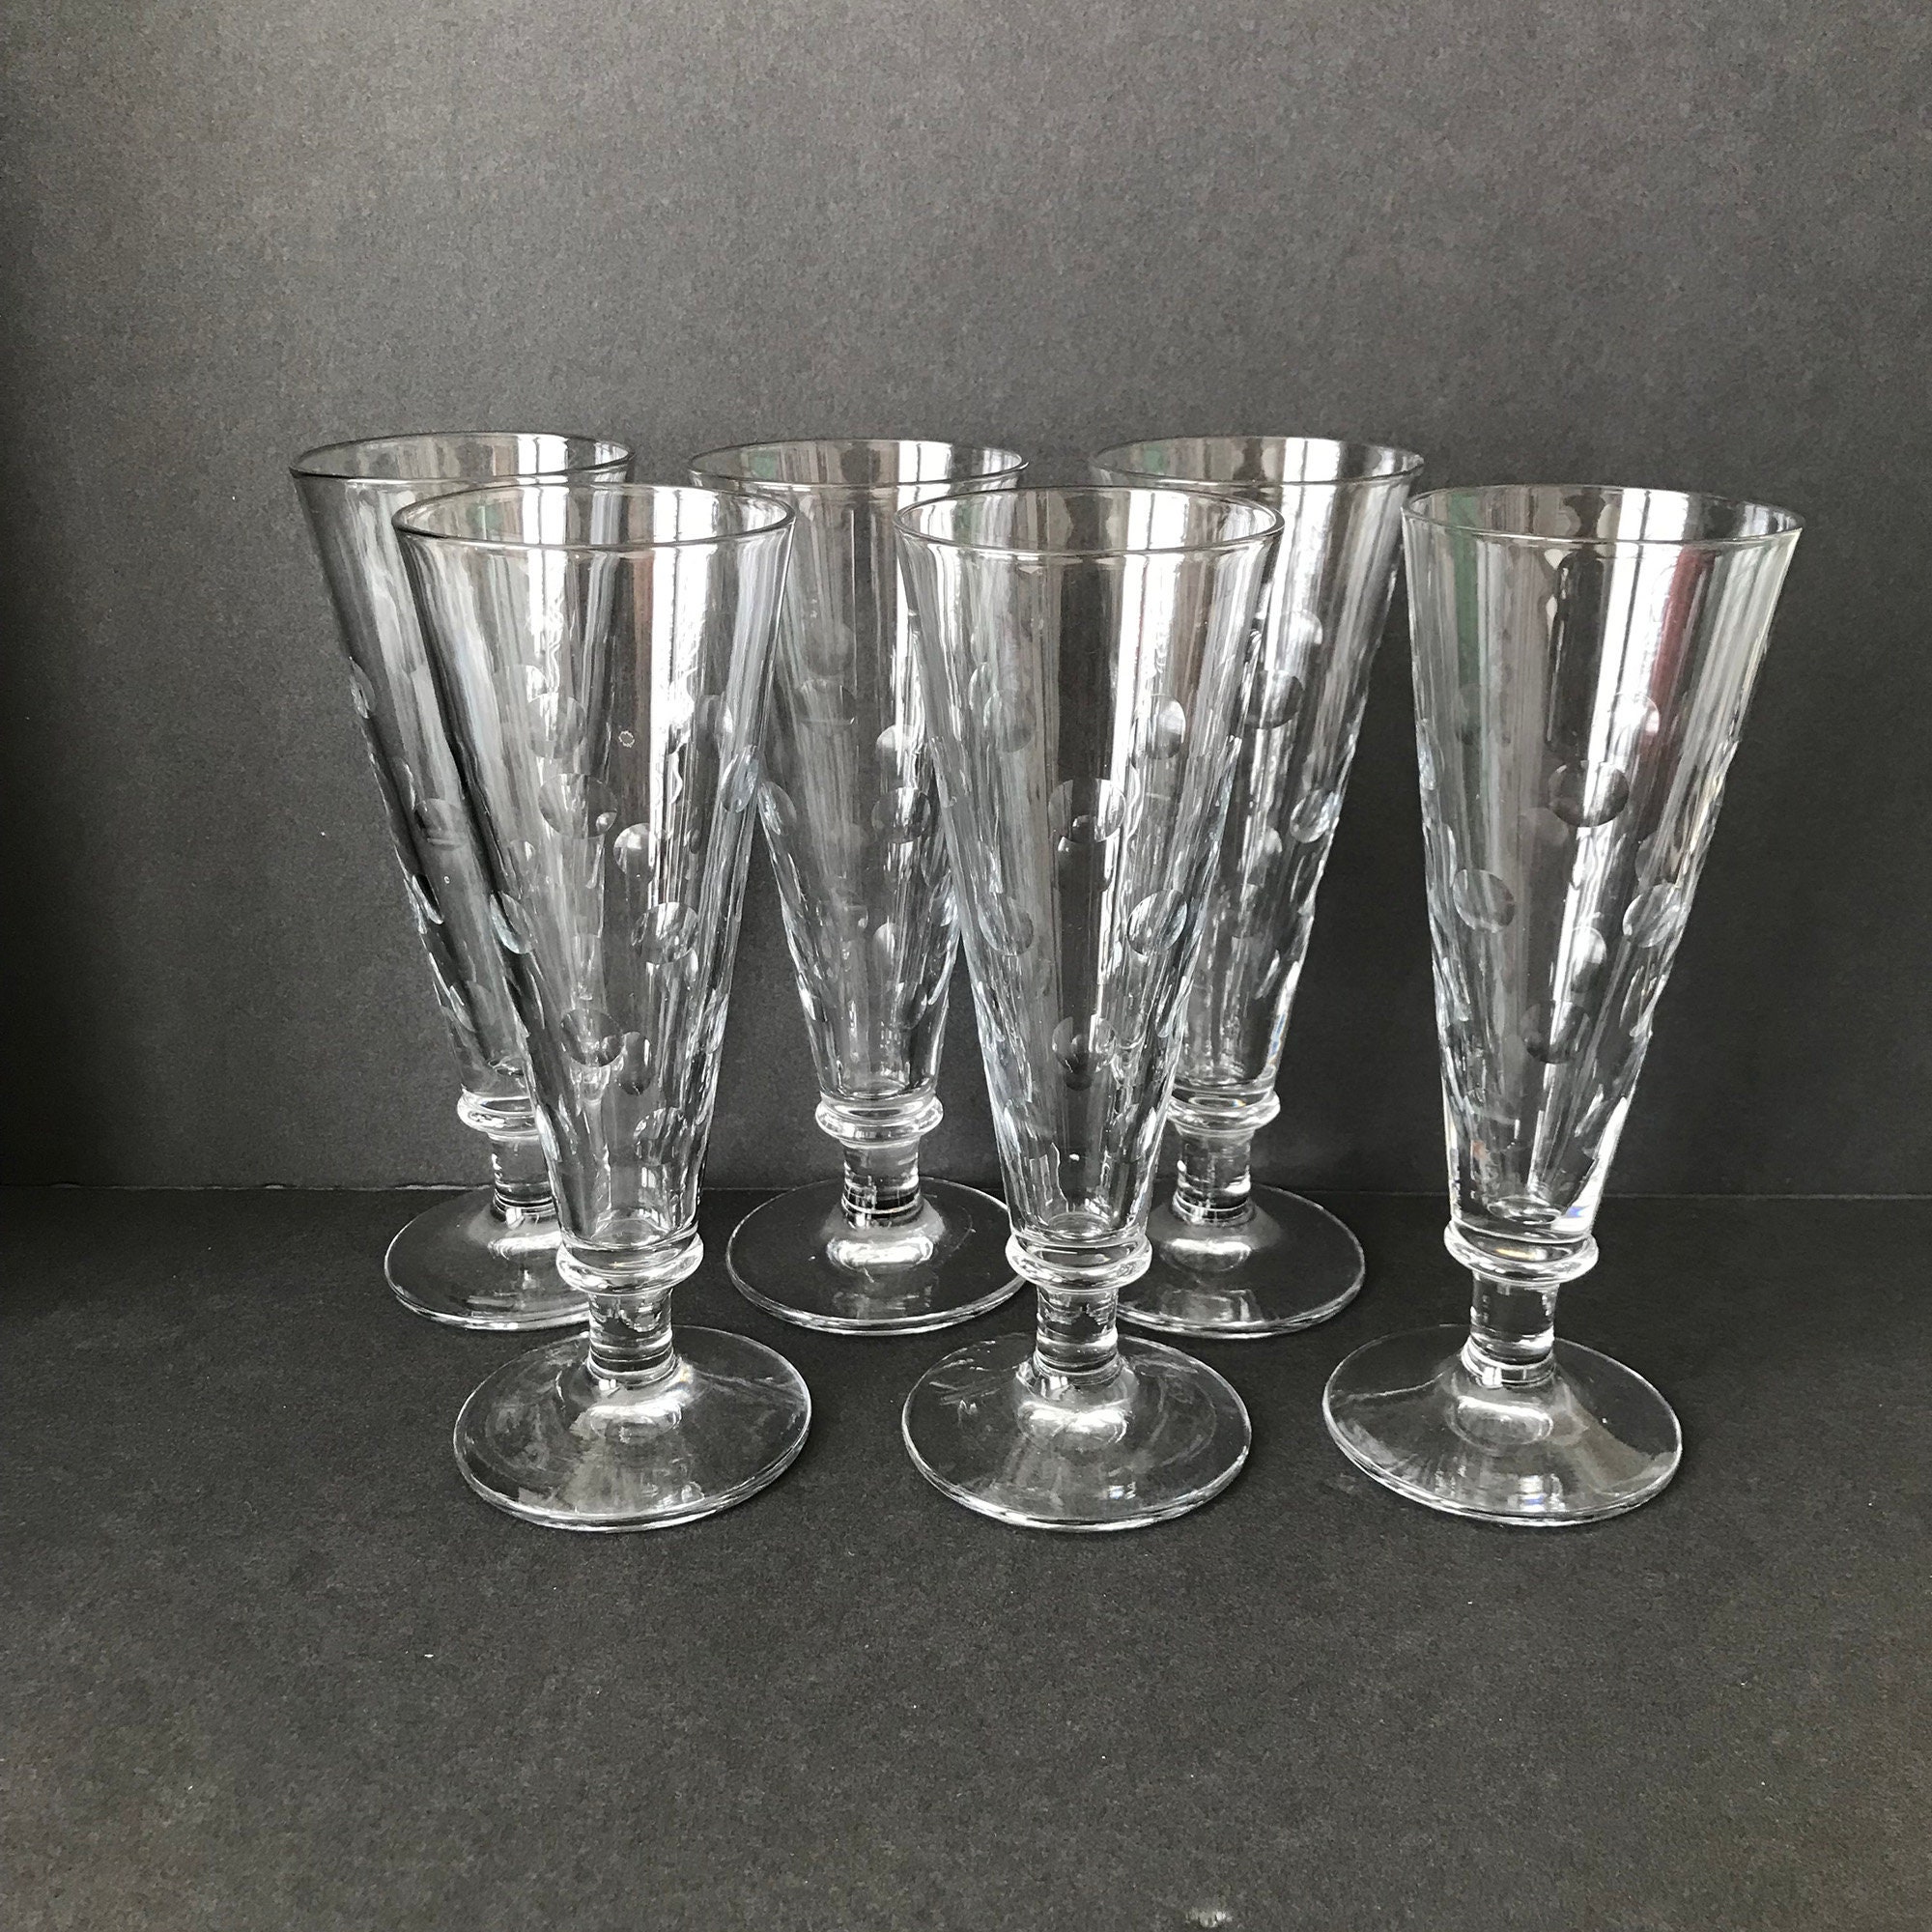 Pair of Vintage Etched Polka Dot Footed Clear Drinking Glasses